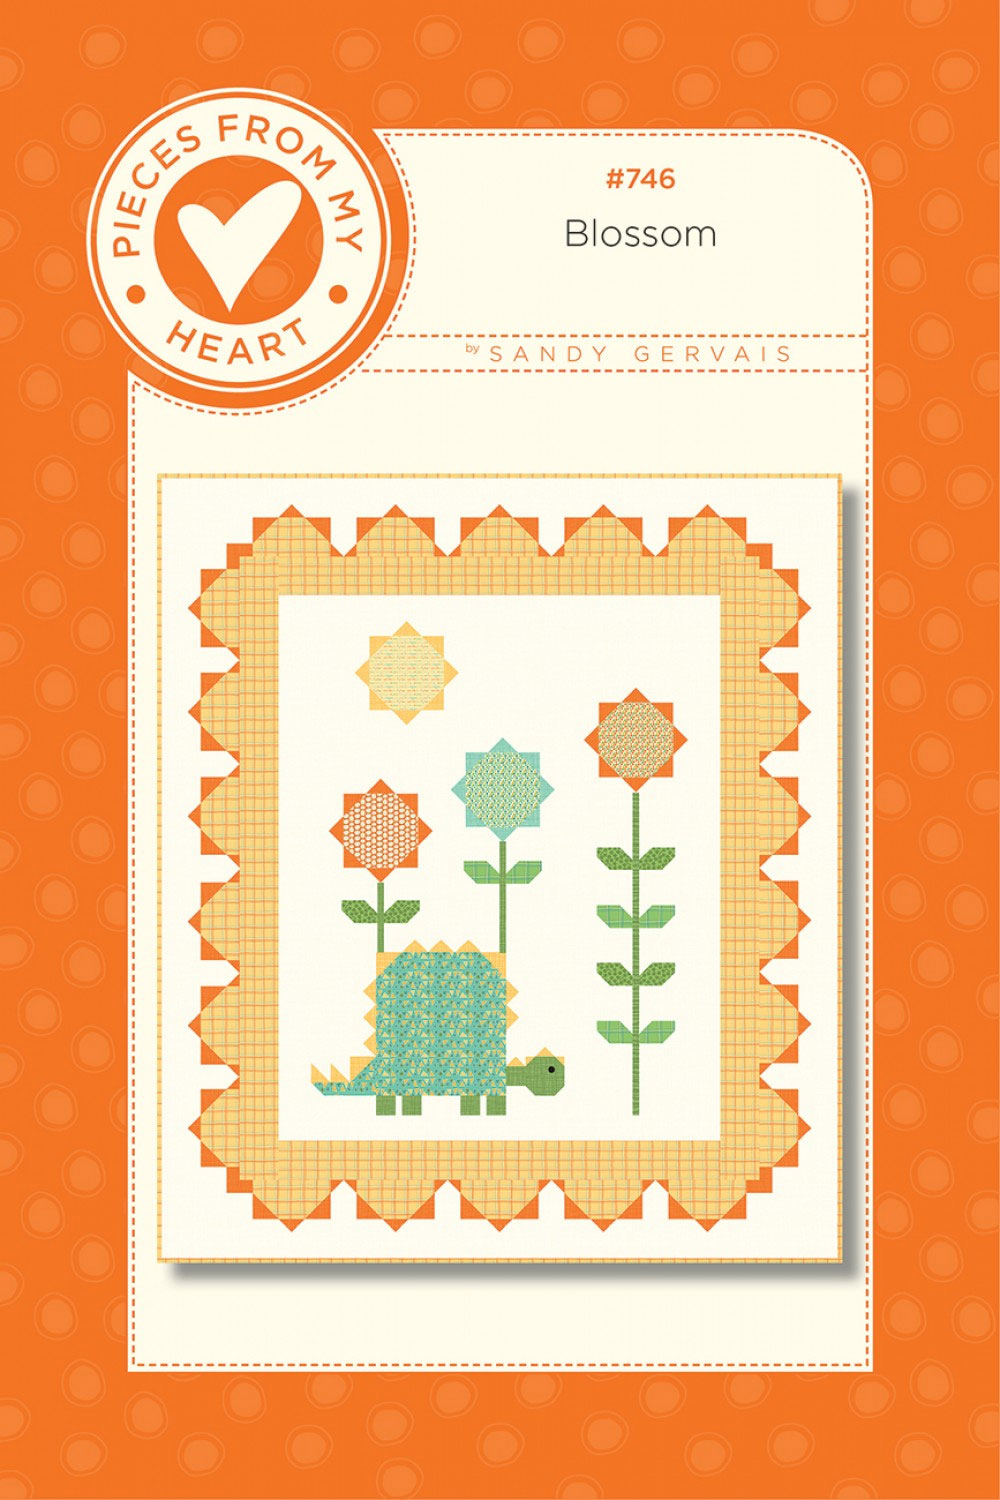 Blossom-quilt-sewing-pattern-Pieces-From-My-Heart-front